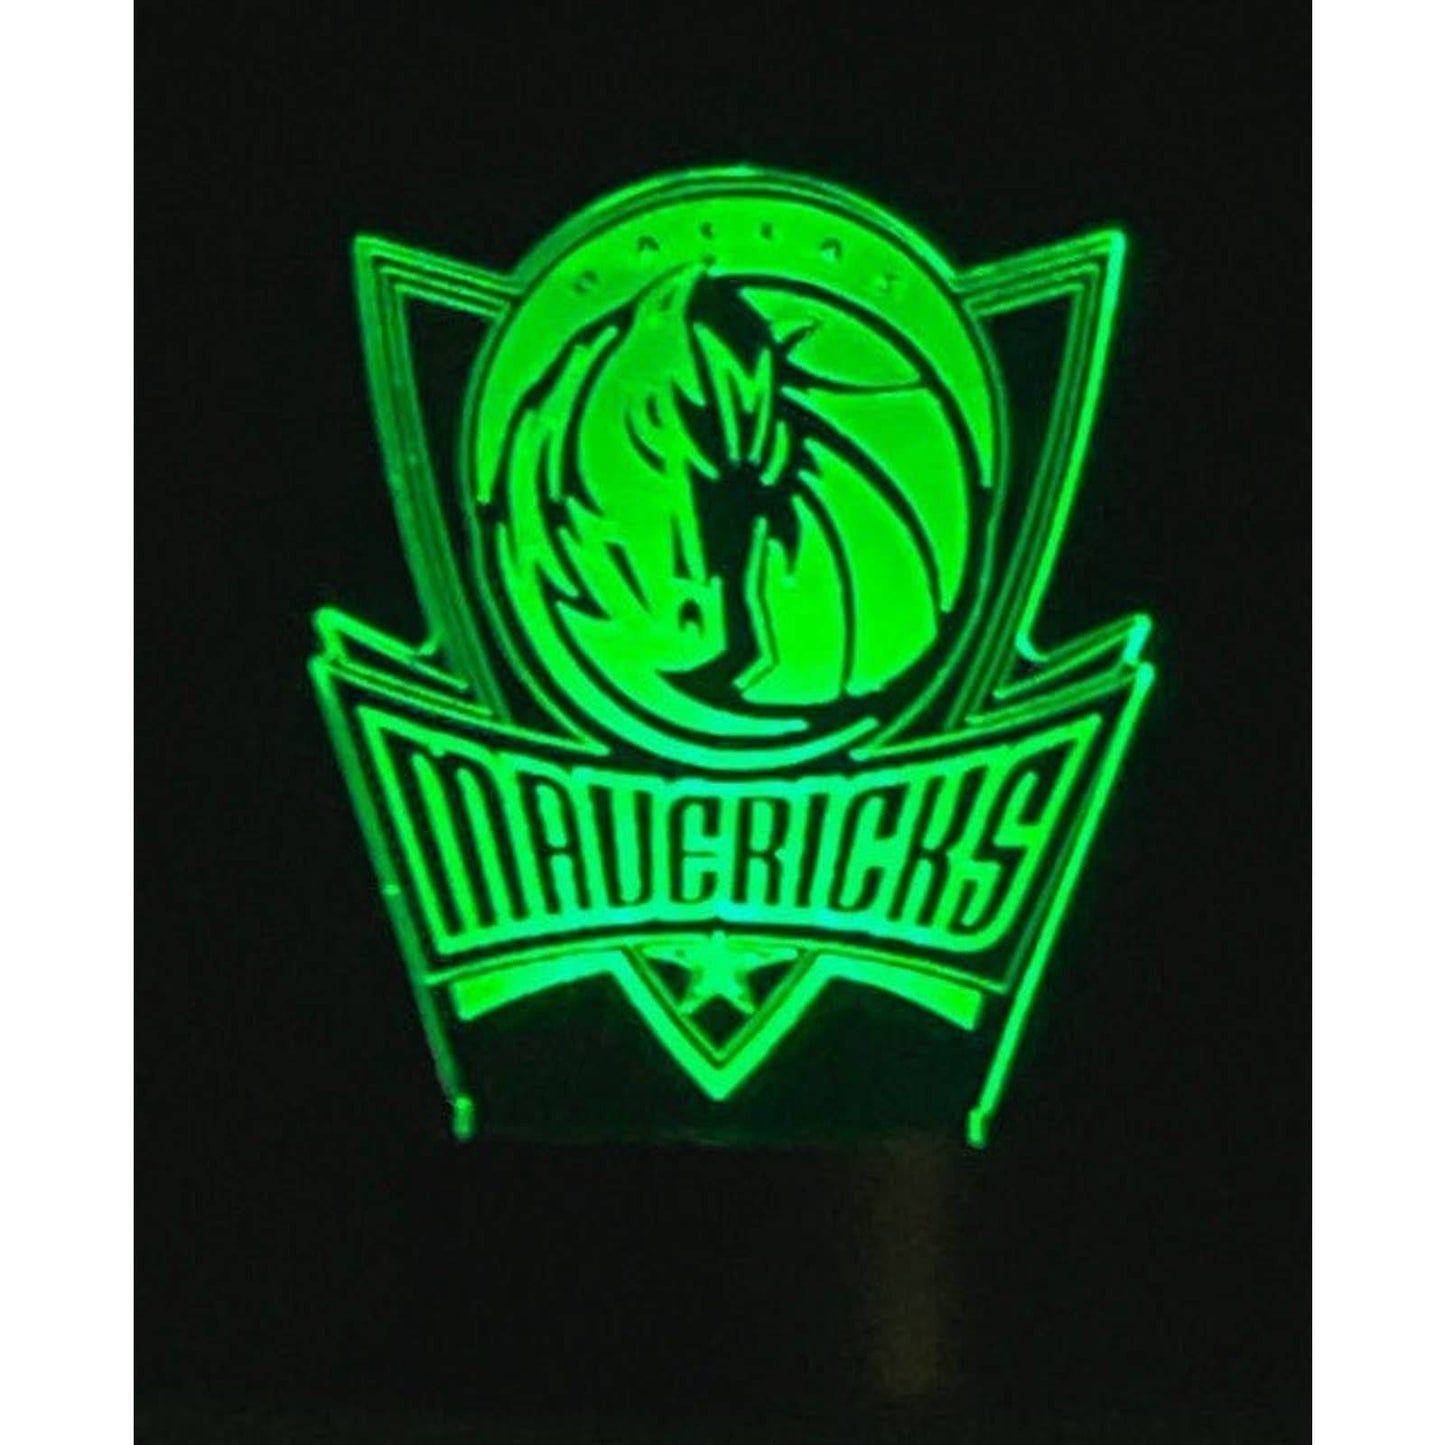 Dallas Mavericks 3D LED Night-Light 7 Color Changing Lamp w/ Touch Switch